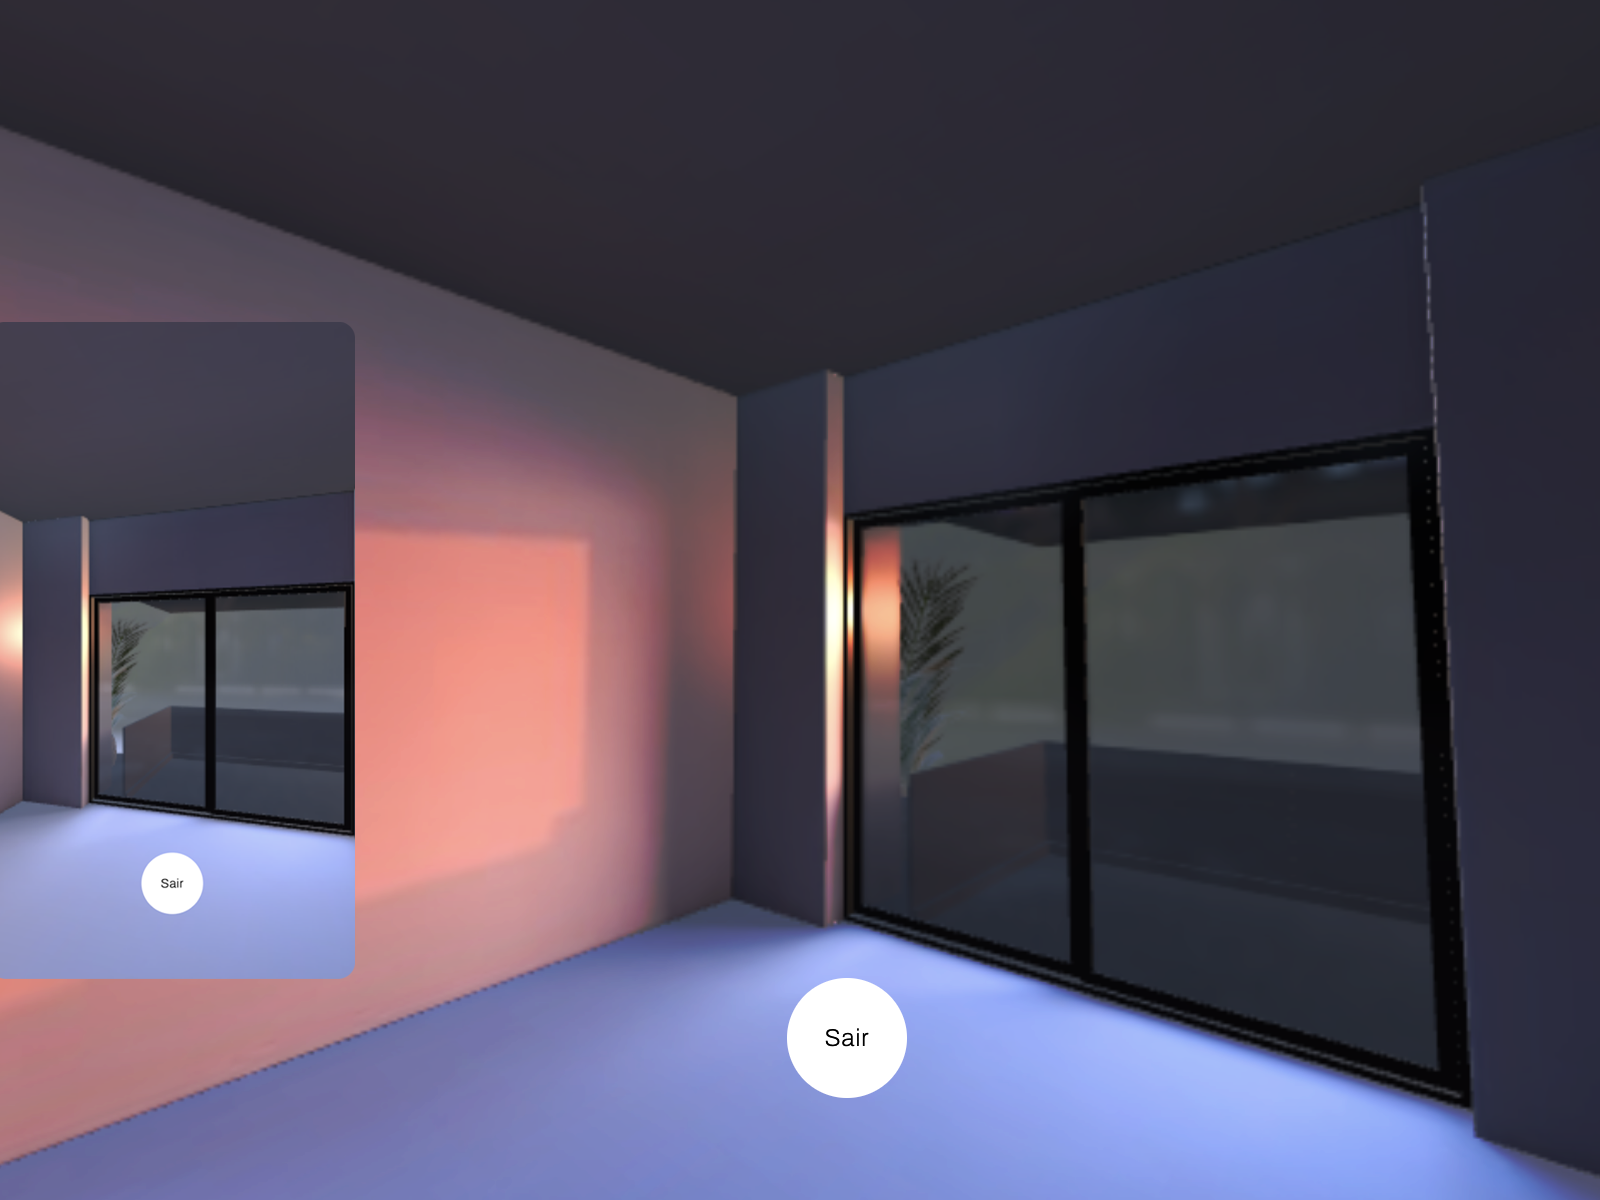 View interior with GLSL blurry reflections in threejs